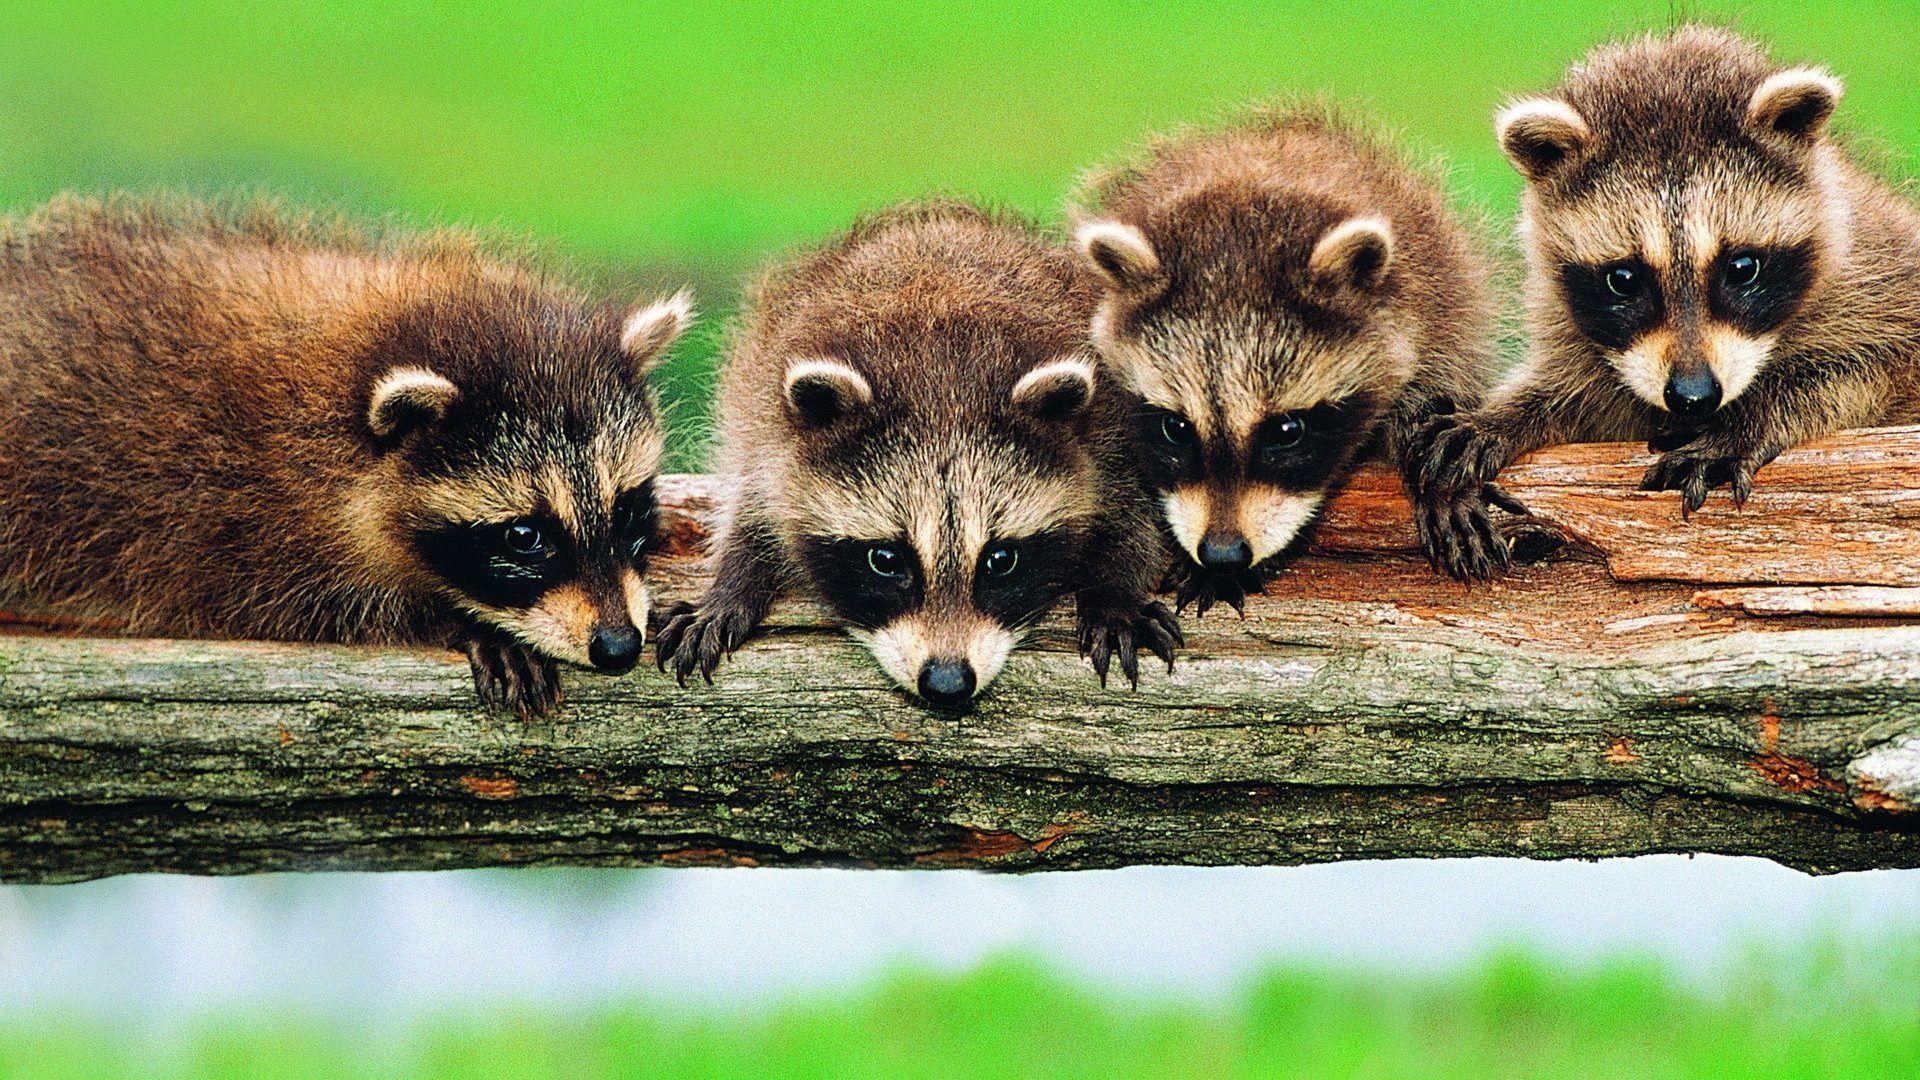 Raccoons Tag wallpaper: Grass Animals Raccoons Animal Picture With